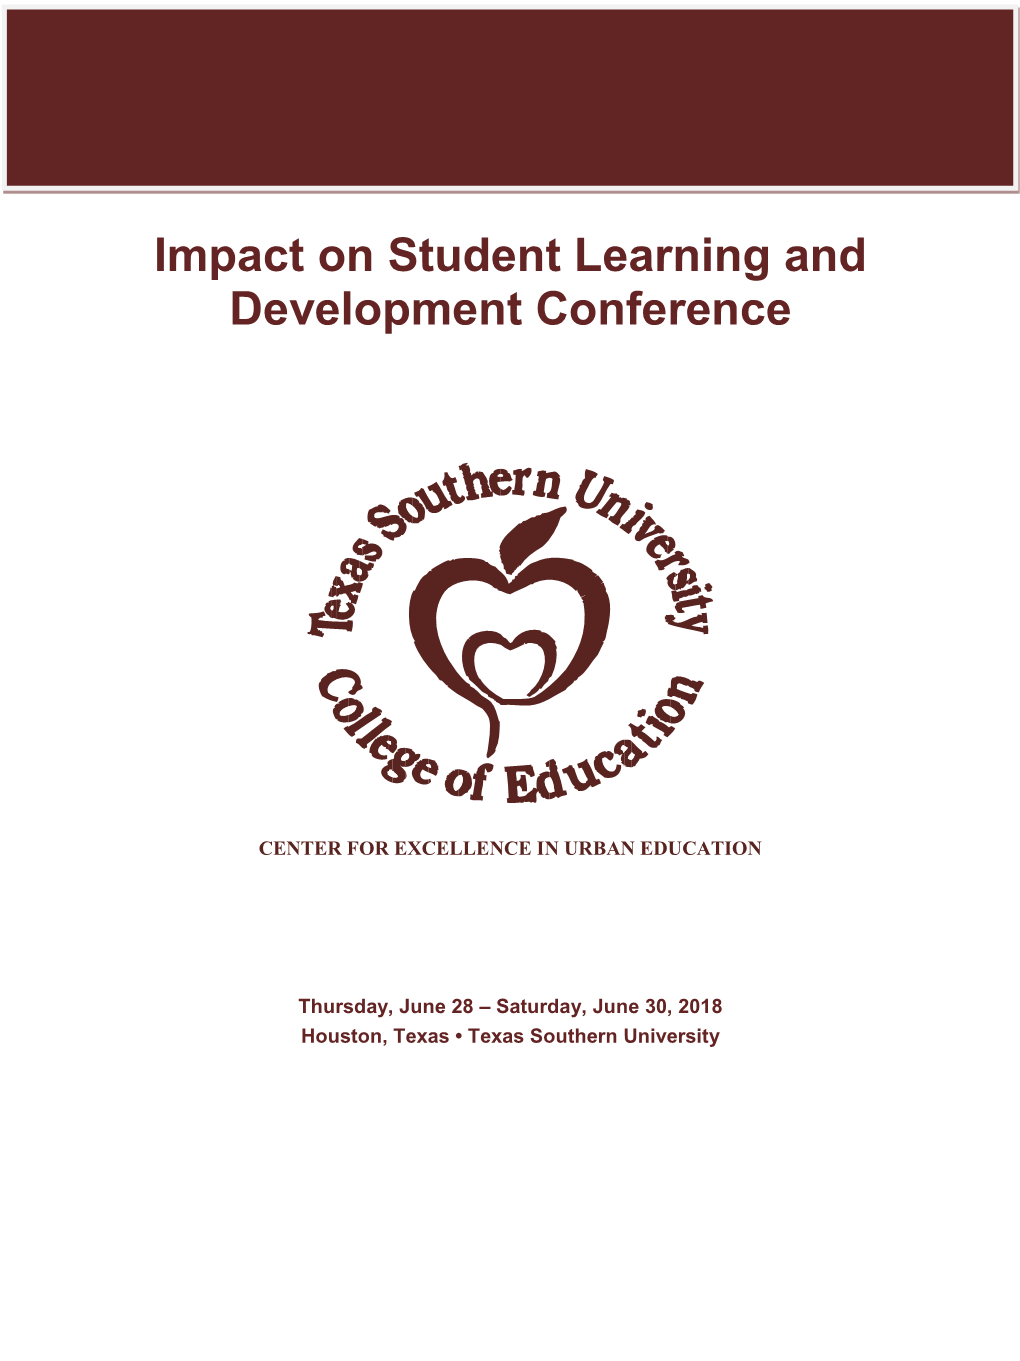 Impact on Student Learning and Development Conference